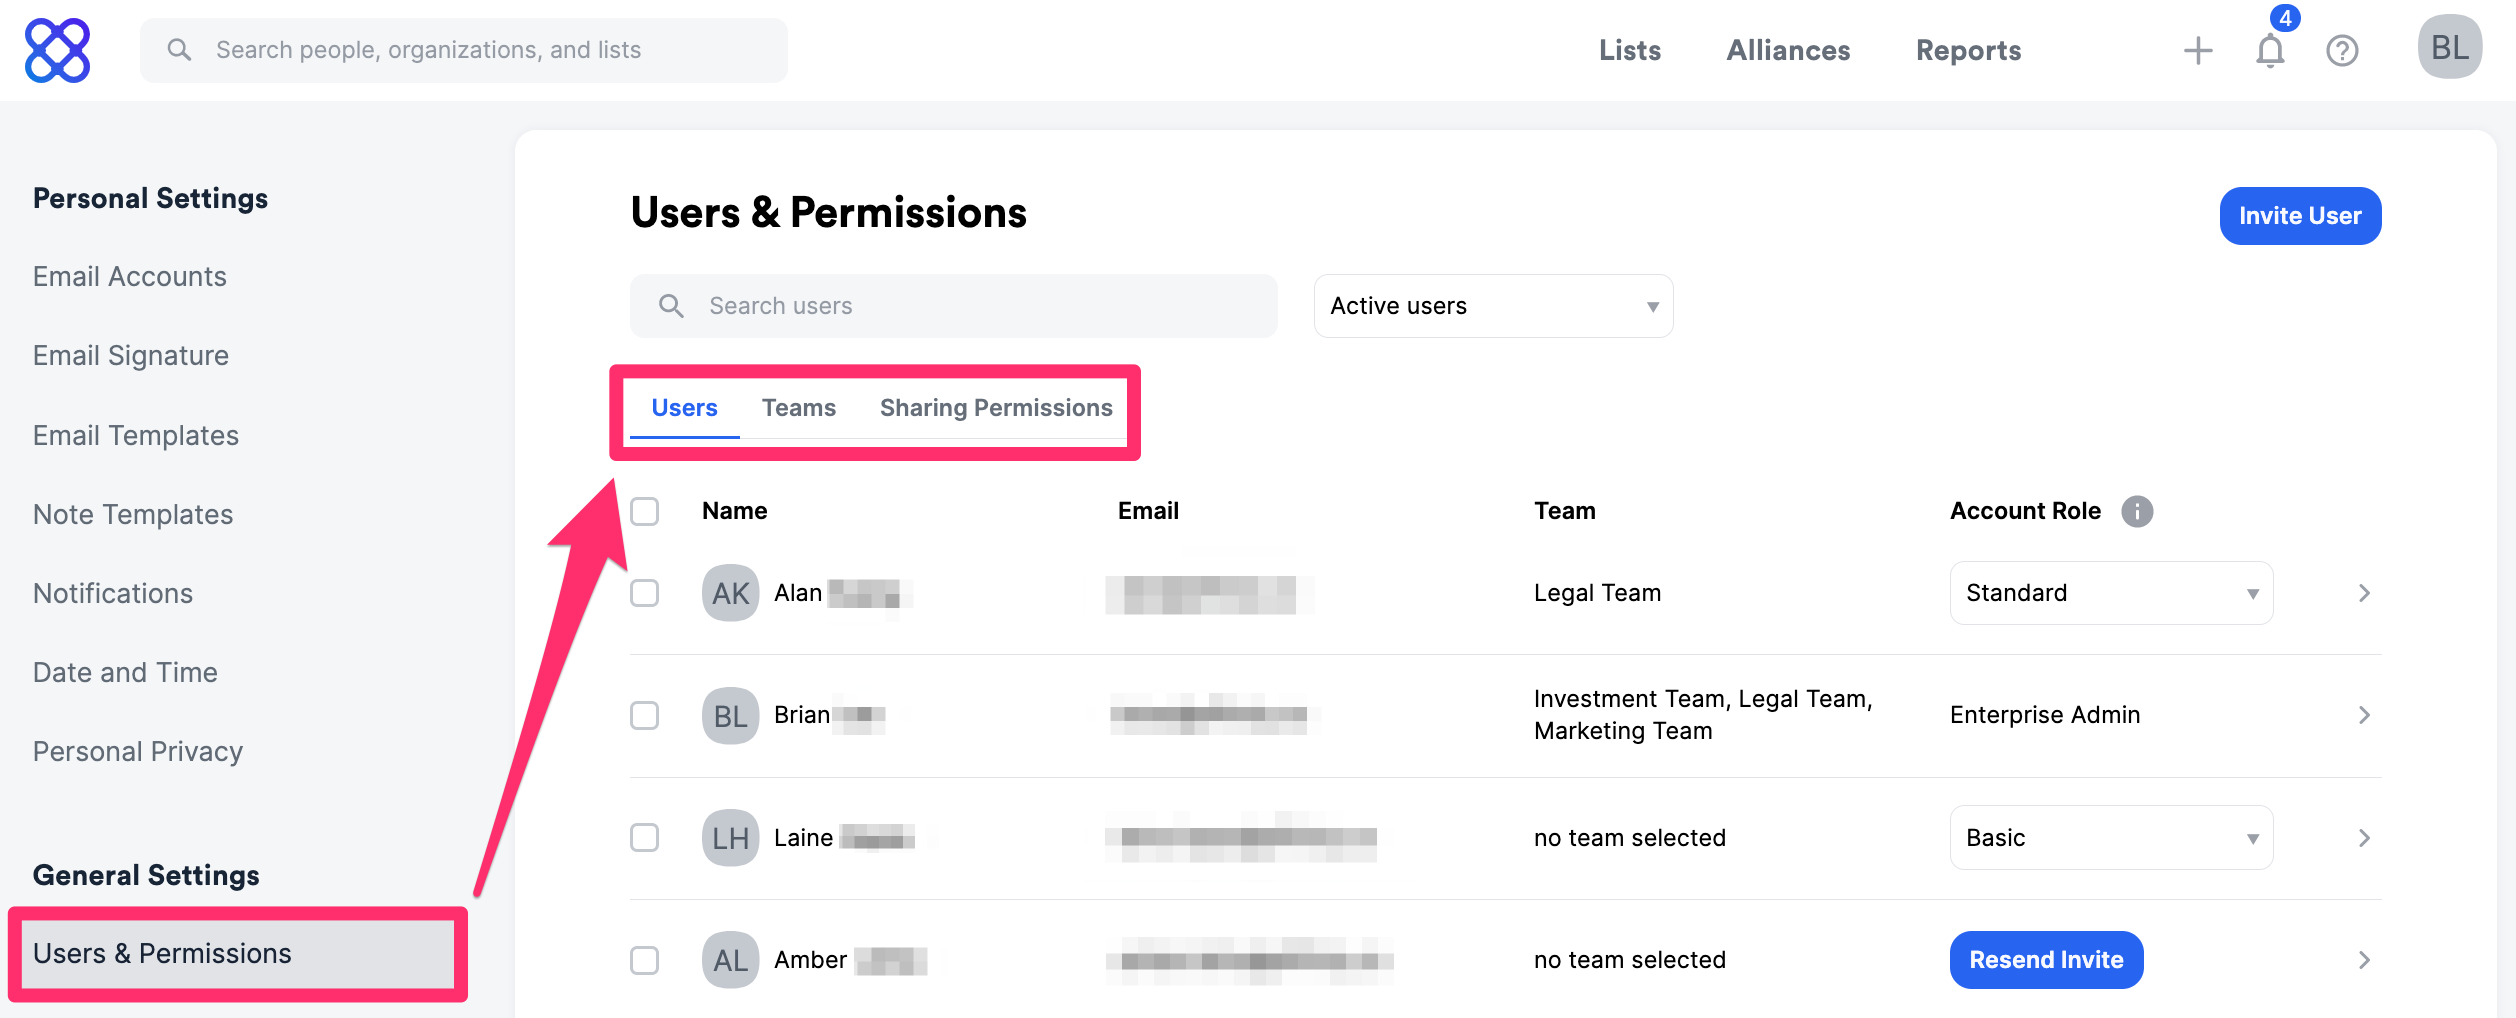 2._Users_and_Permissions.png